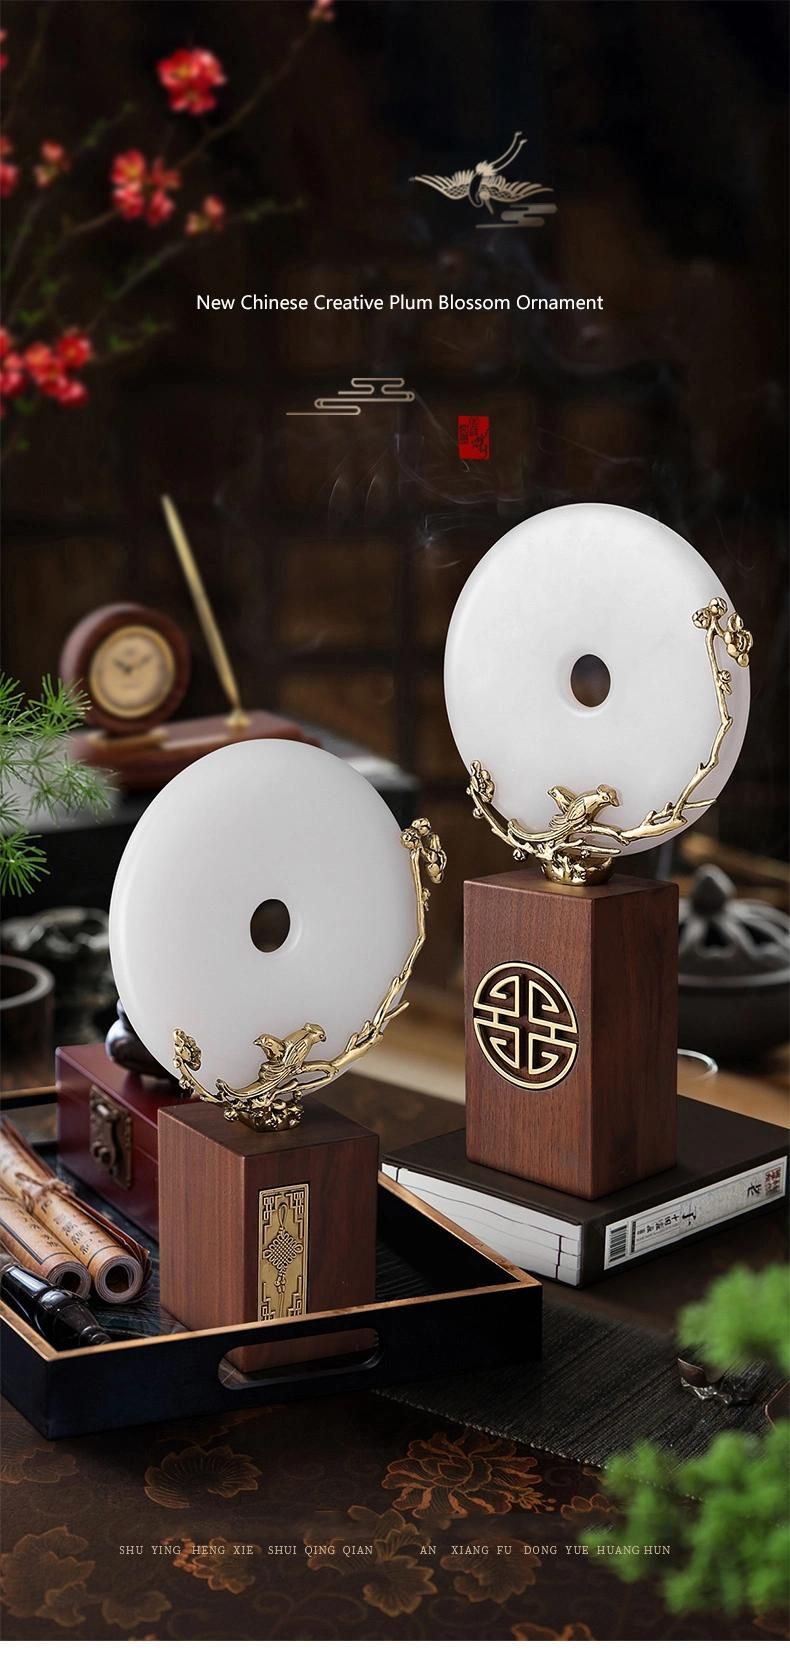 New Chinese Products Home Accessories Decor Jade Ornamental Material Decoration for Living Room